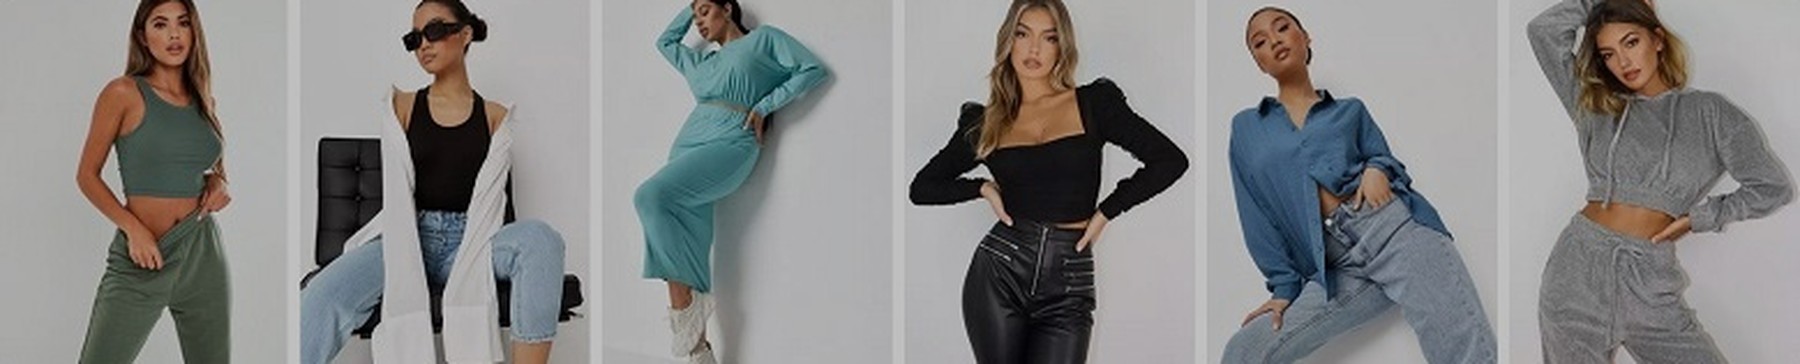 Spend $100+ at Missguided & Get $20 at Amazon